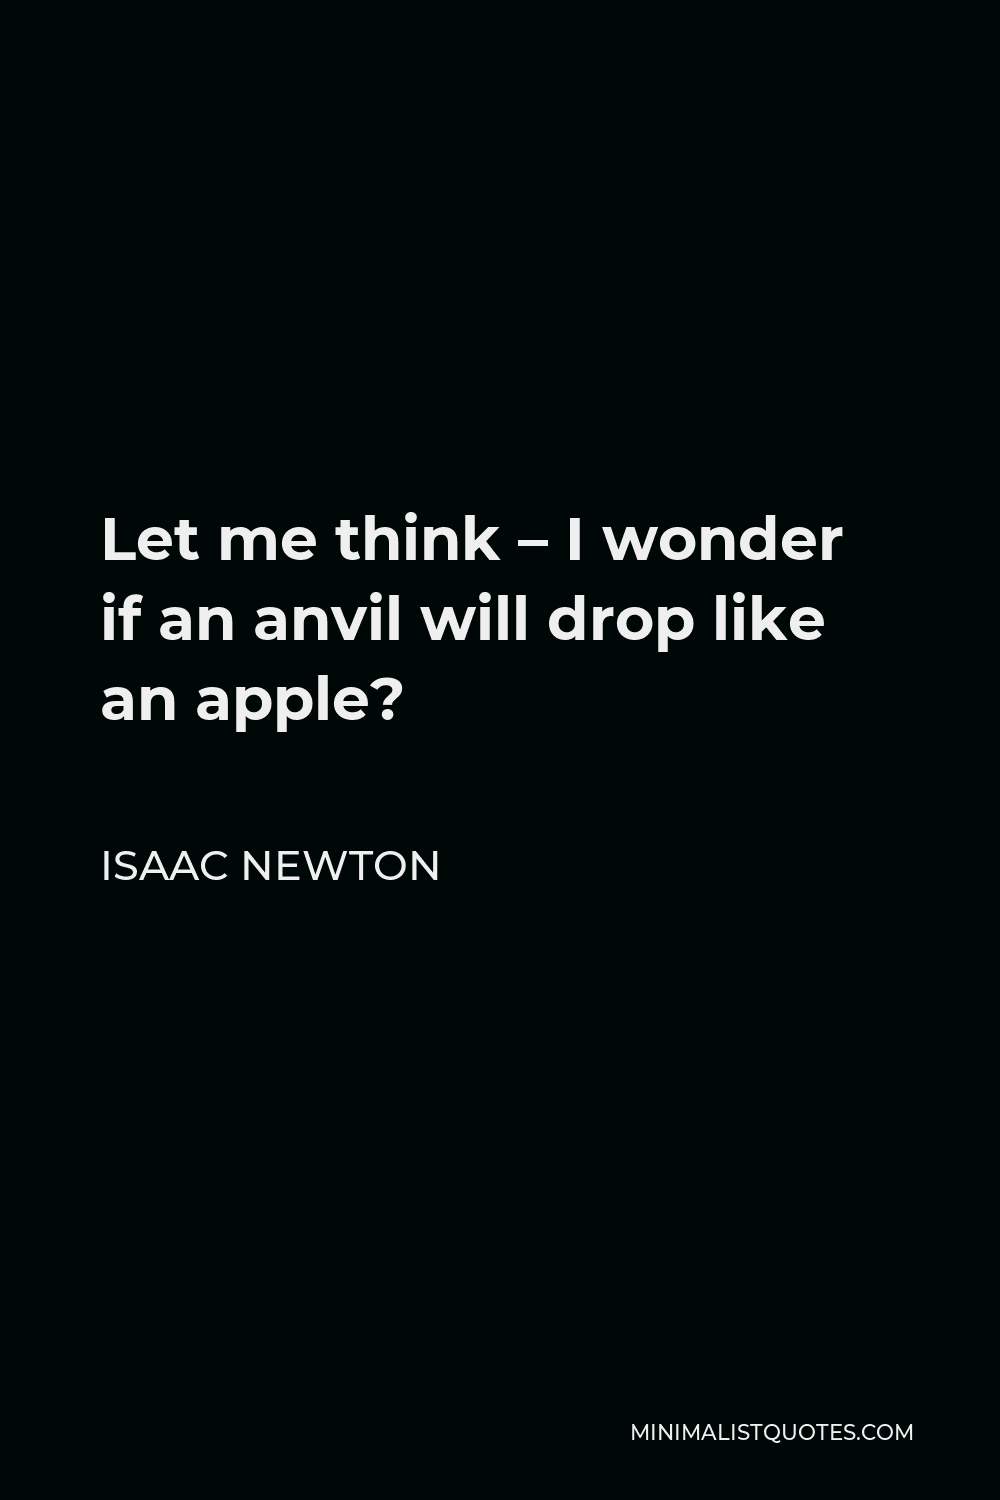 Isaac Newton Quote - Let me think – I wonder if an anvil will drop like an apple?